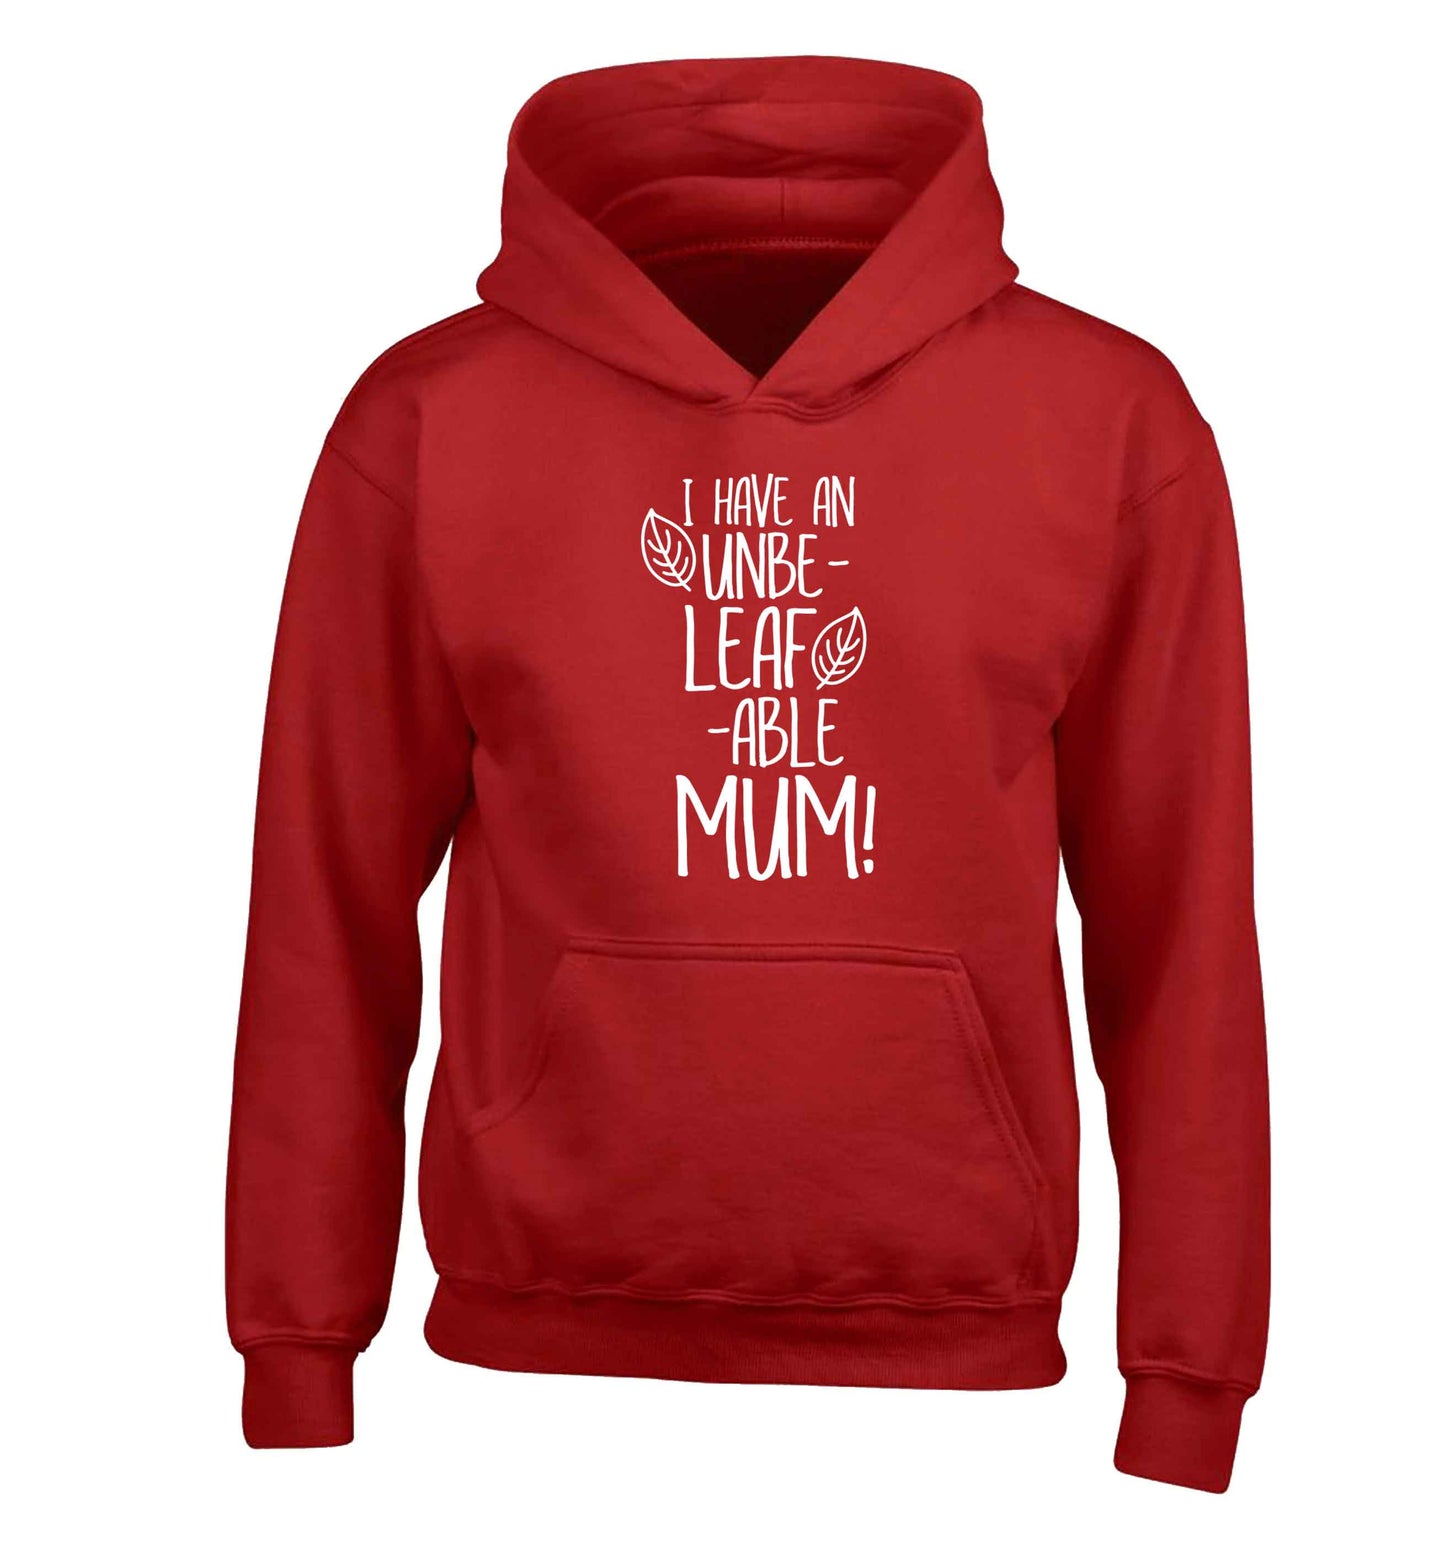 I have an unbeleafable mum! children's red hoodie 12-13 Years